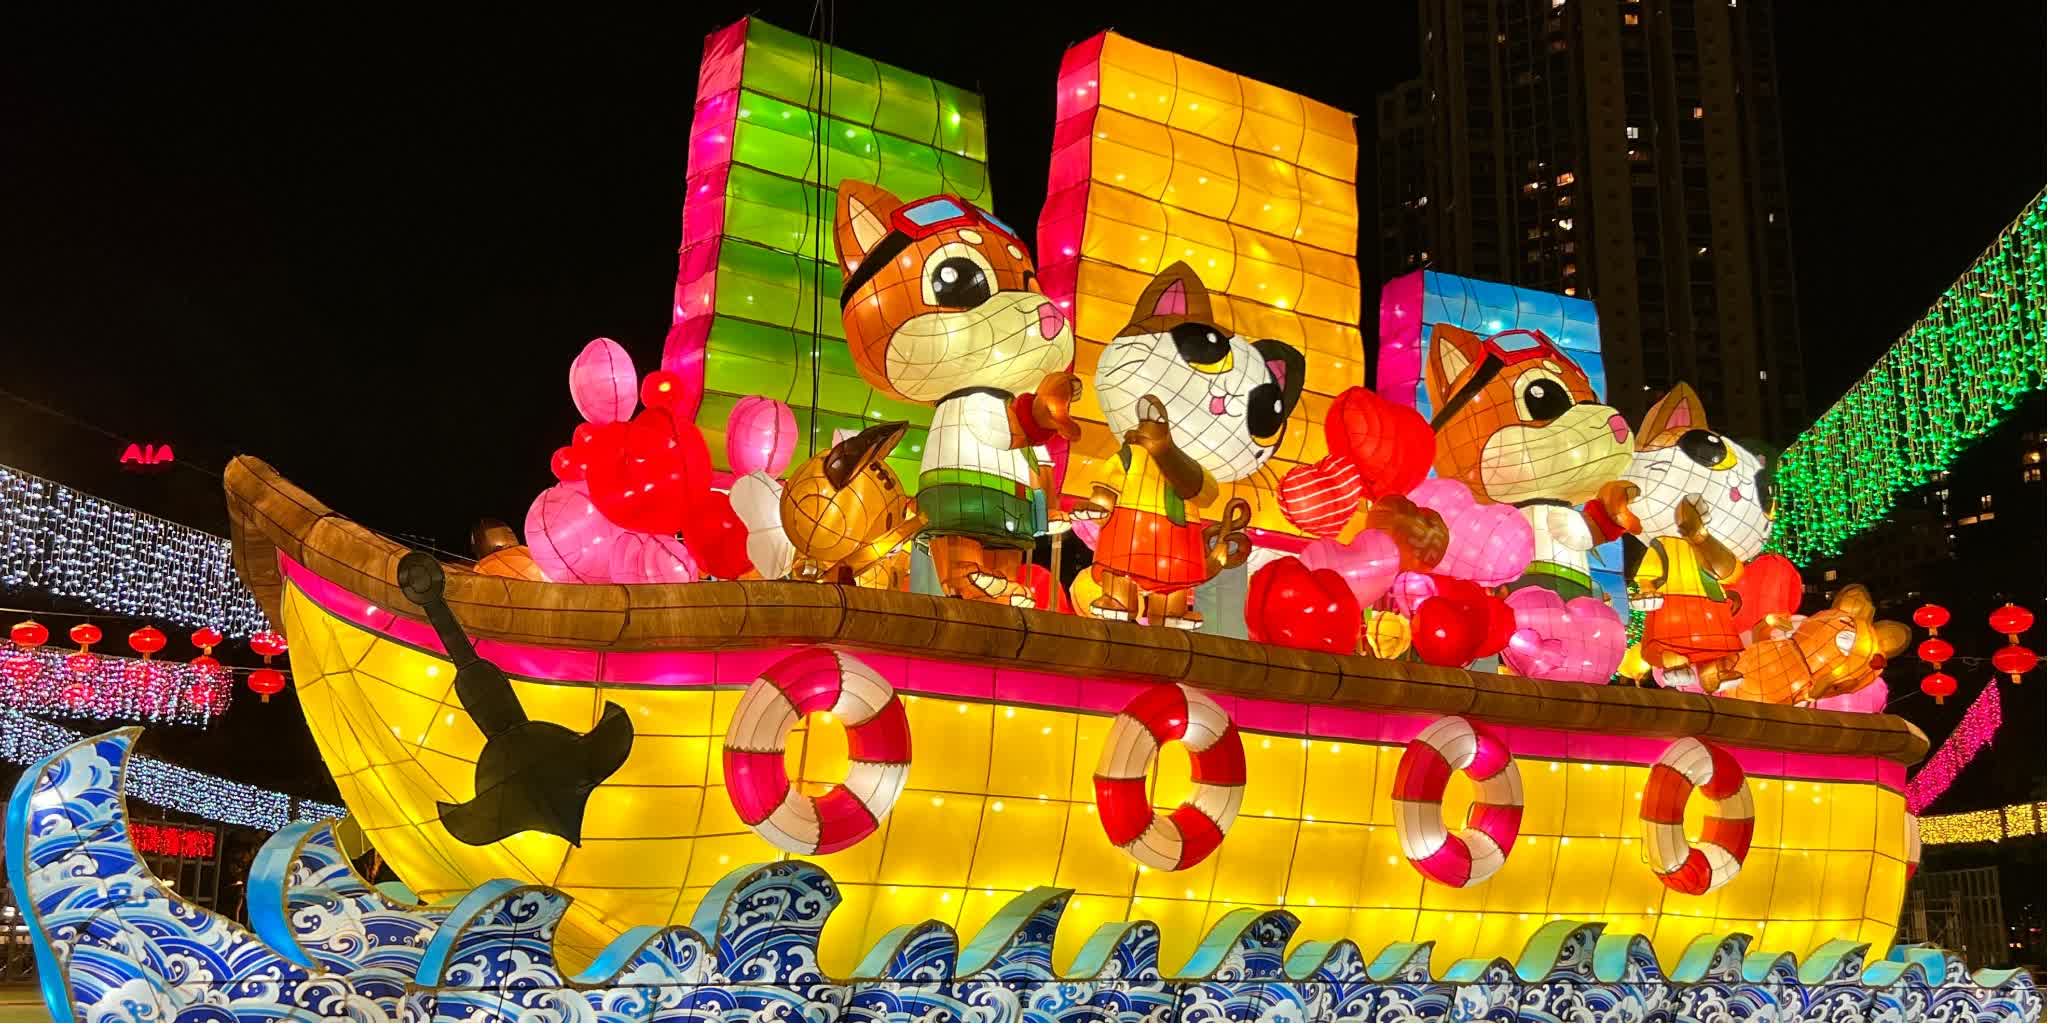 LCSD to hold 2022 Mid-Autumn Lantern Displays from Sept 7